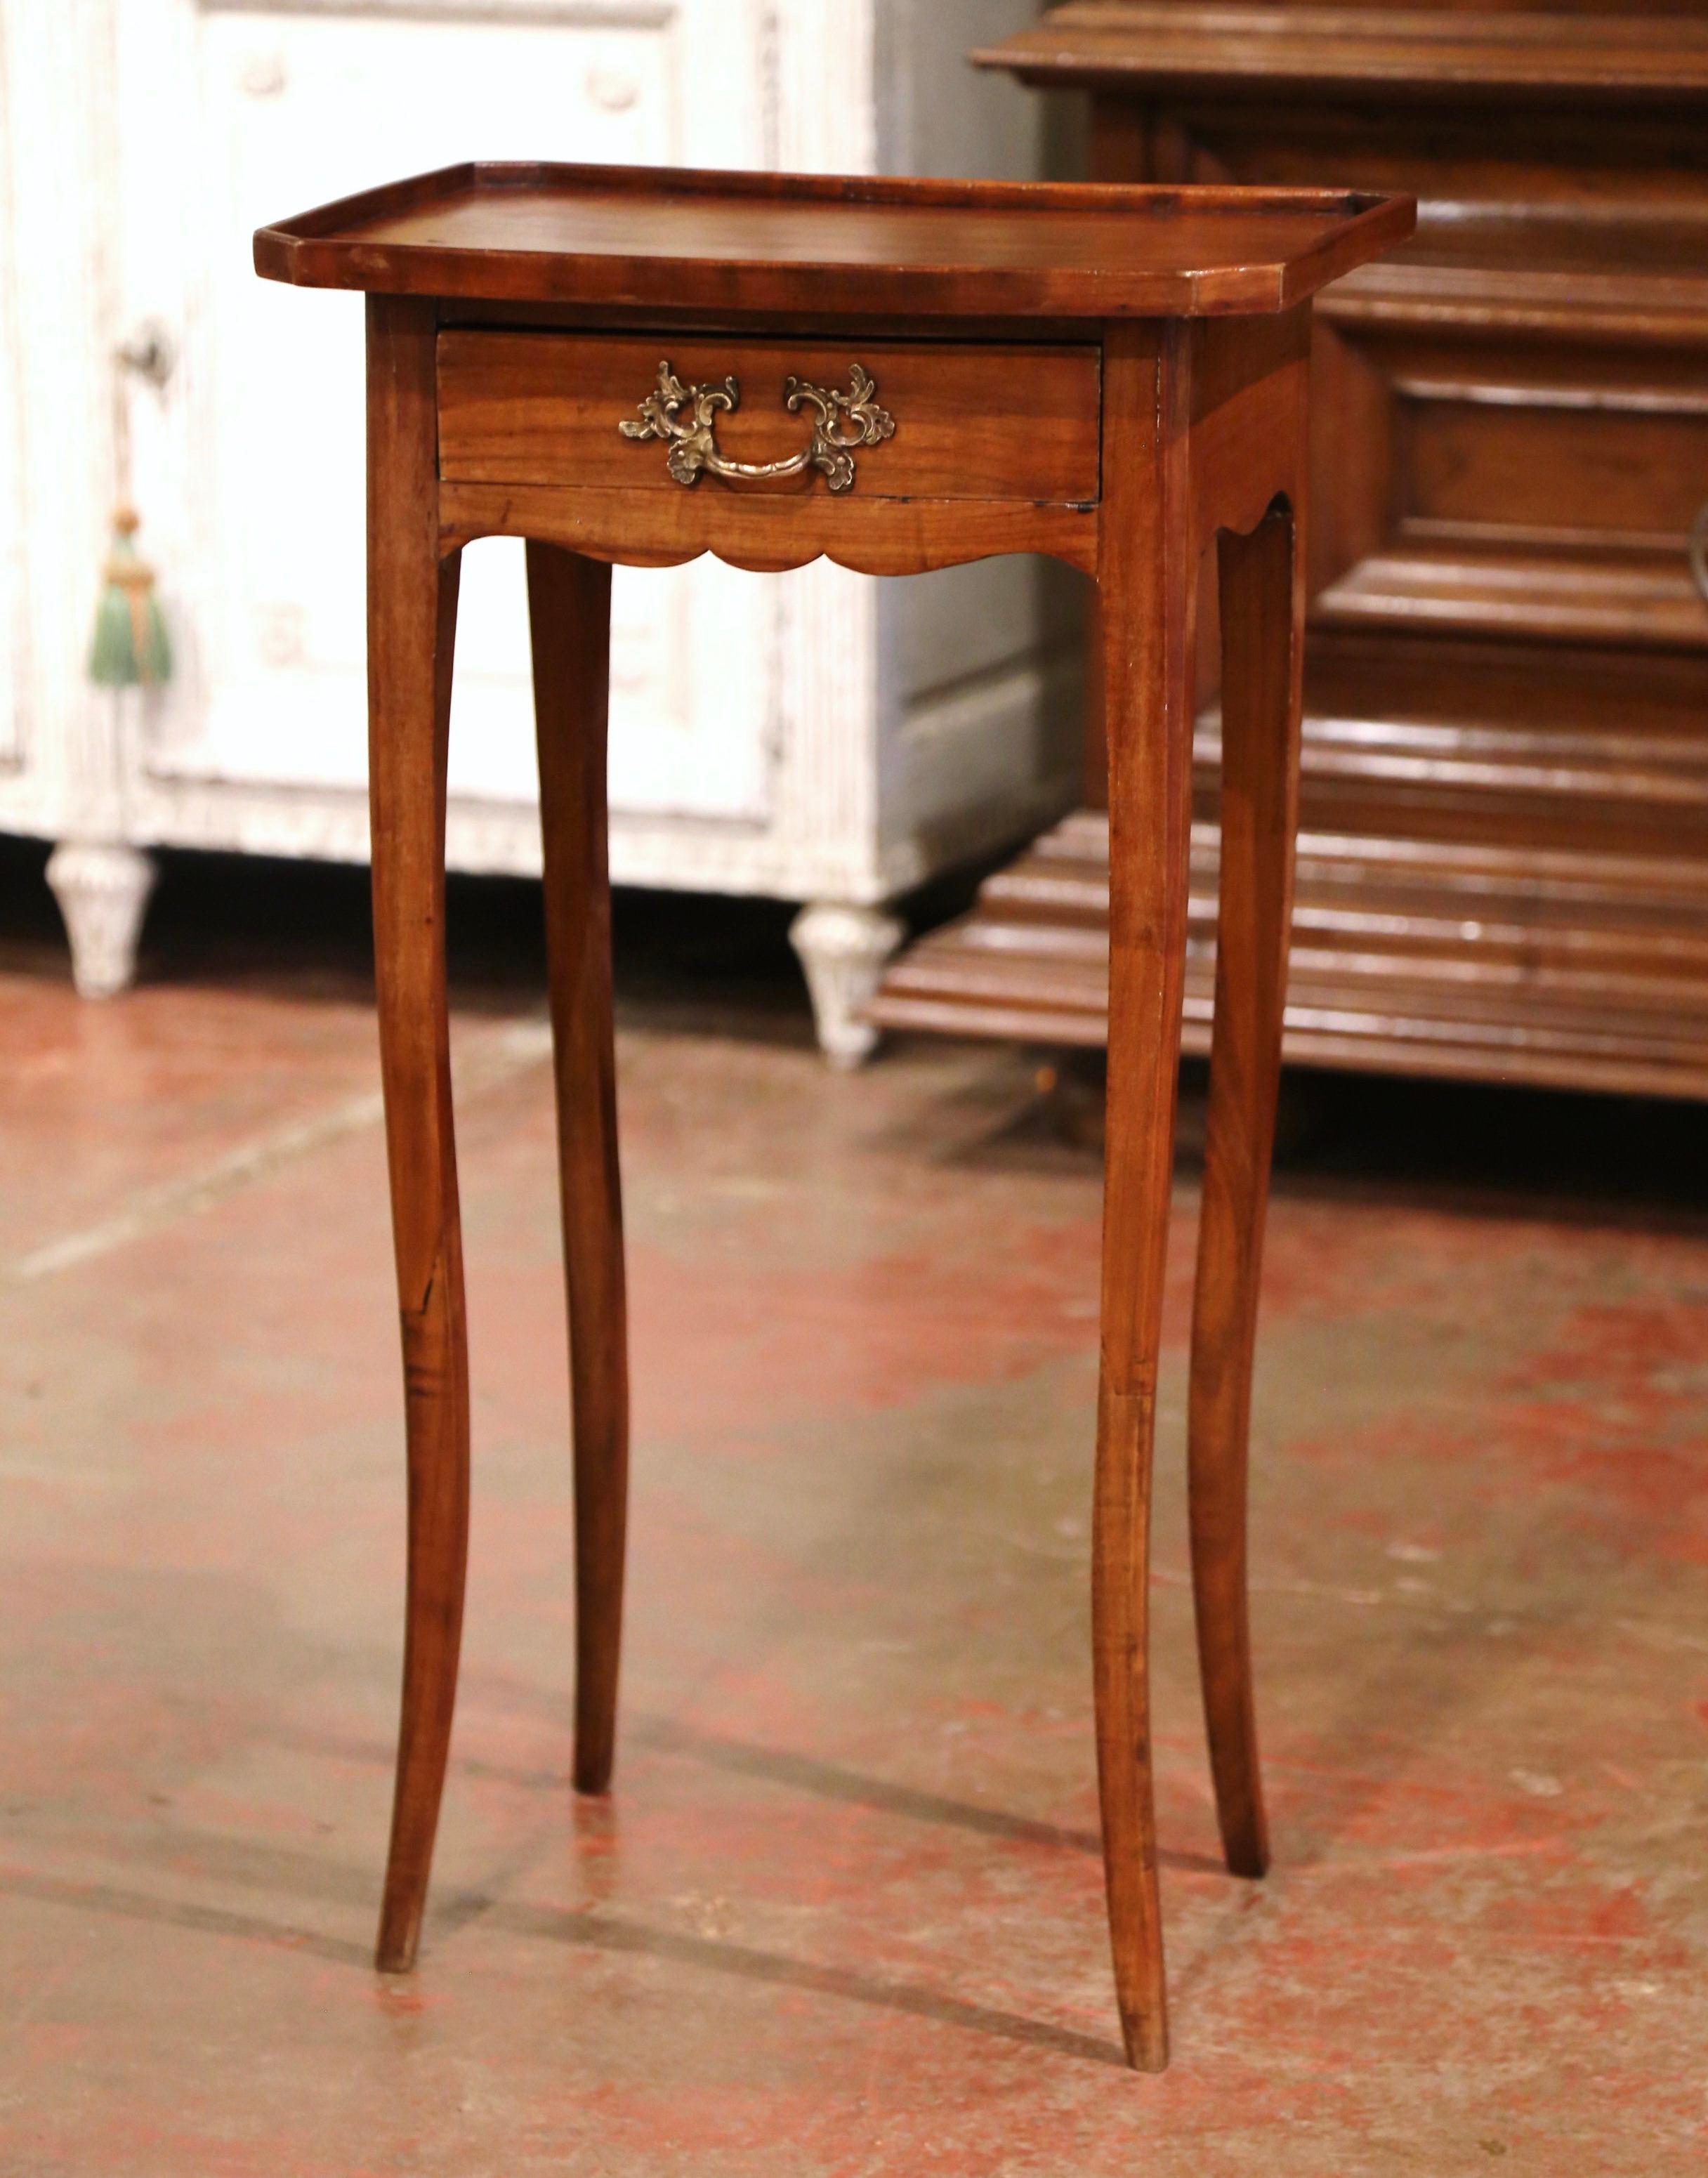 This small fruitwood antique end table would make a beautiful addition next to a sofa in a living room. Crafted in France, circa 1880, the fine side table stands on cabriole legs over a scalloped apron. The petite table is fitted with a small drawer